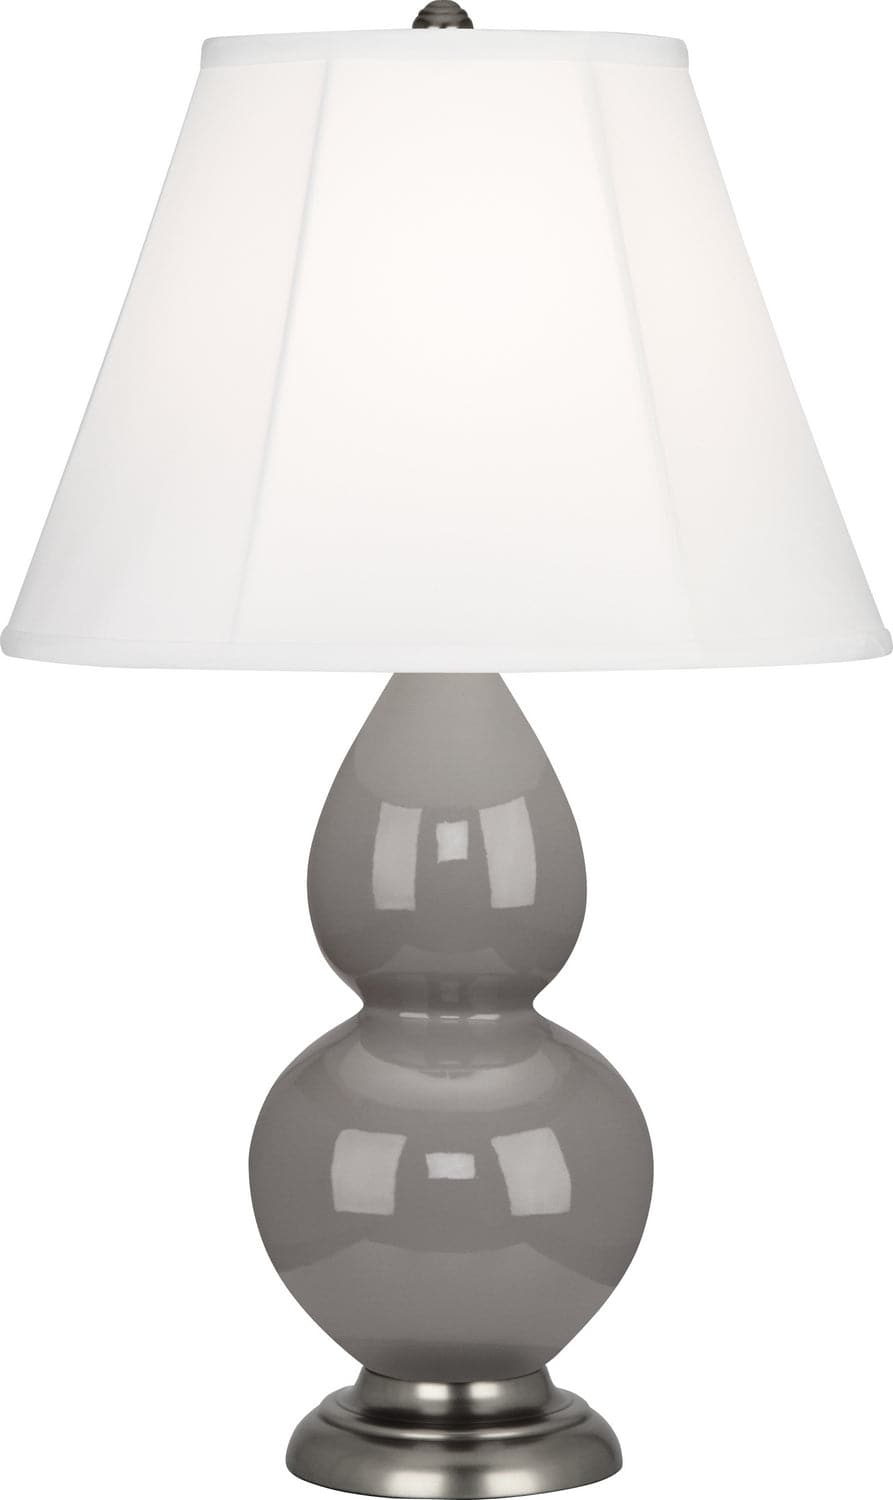 Robert Abbey - 1770 - One Light Accent Lamp - Small Double Gourd - Smoky Taupe Glazed